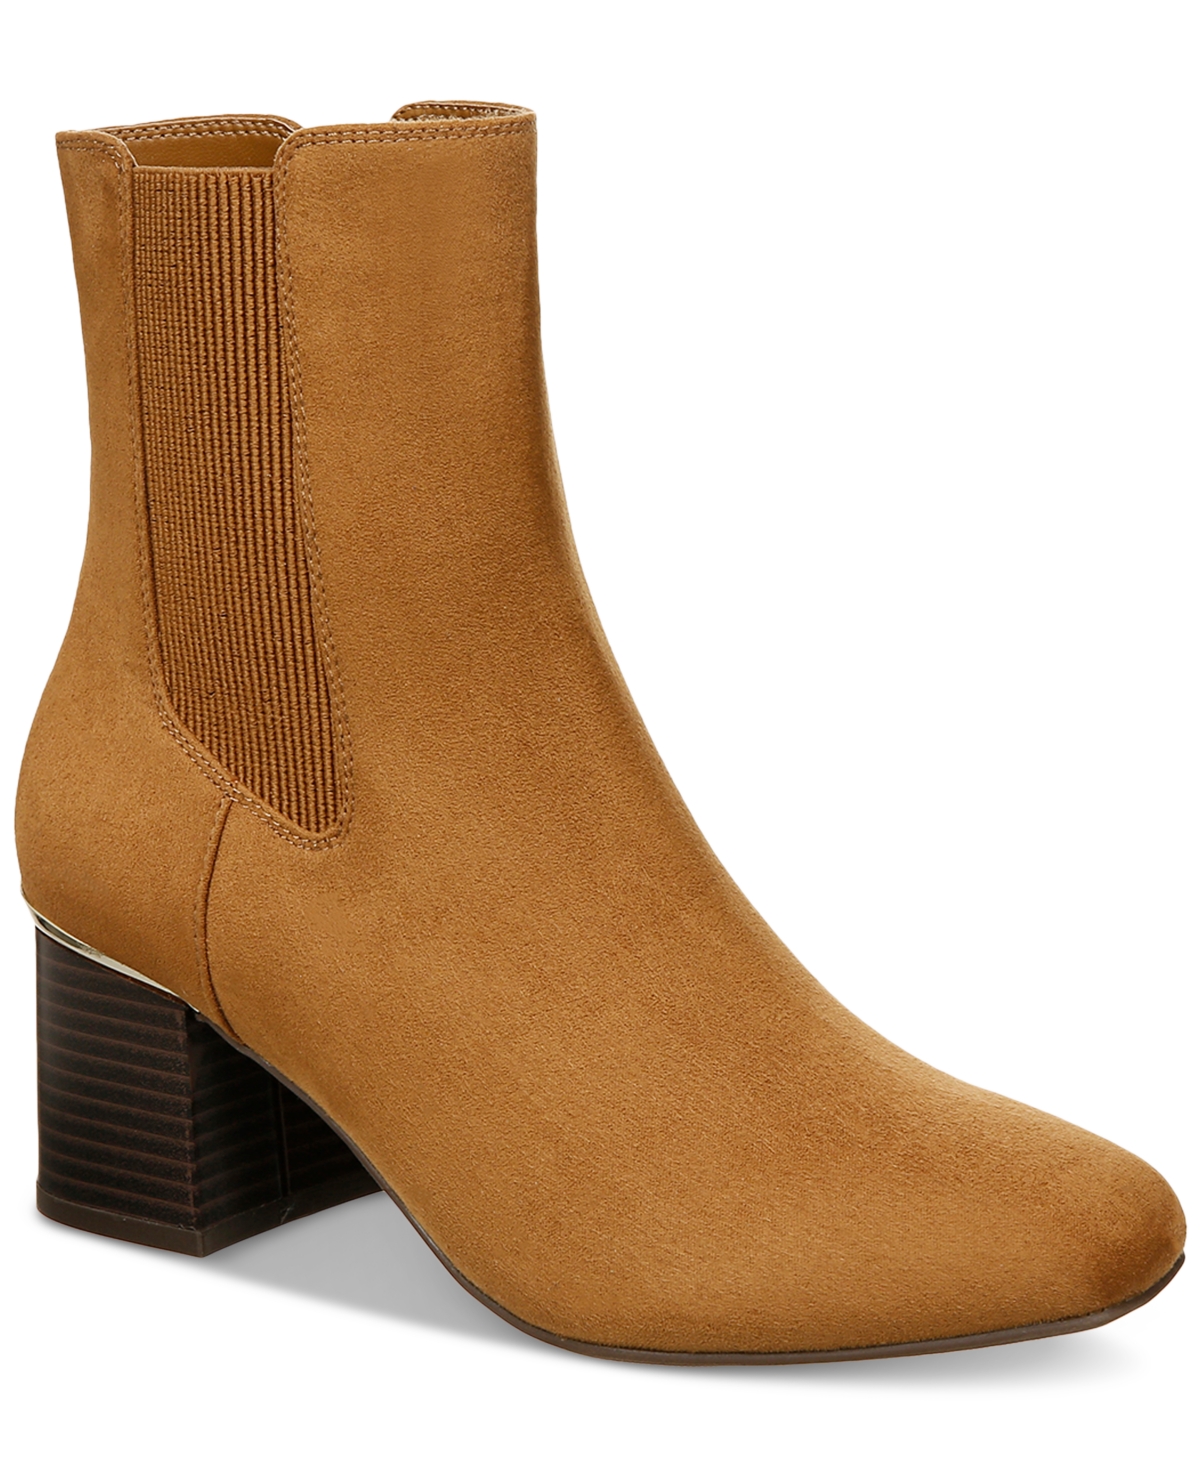 Women's Rockee Square-Toe Booties, Created for Macy's - Cognac Micro